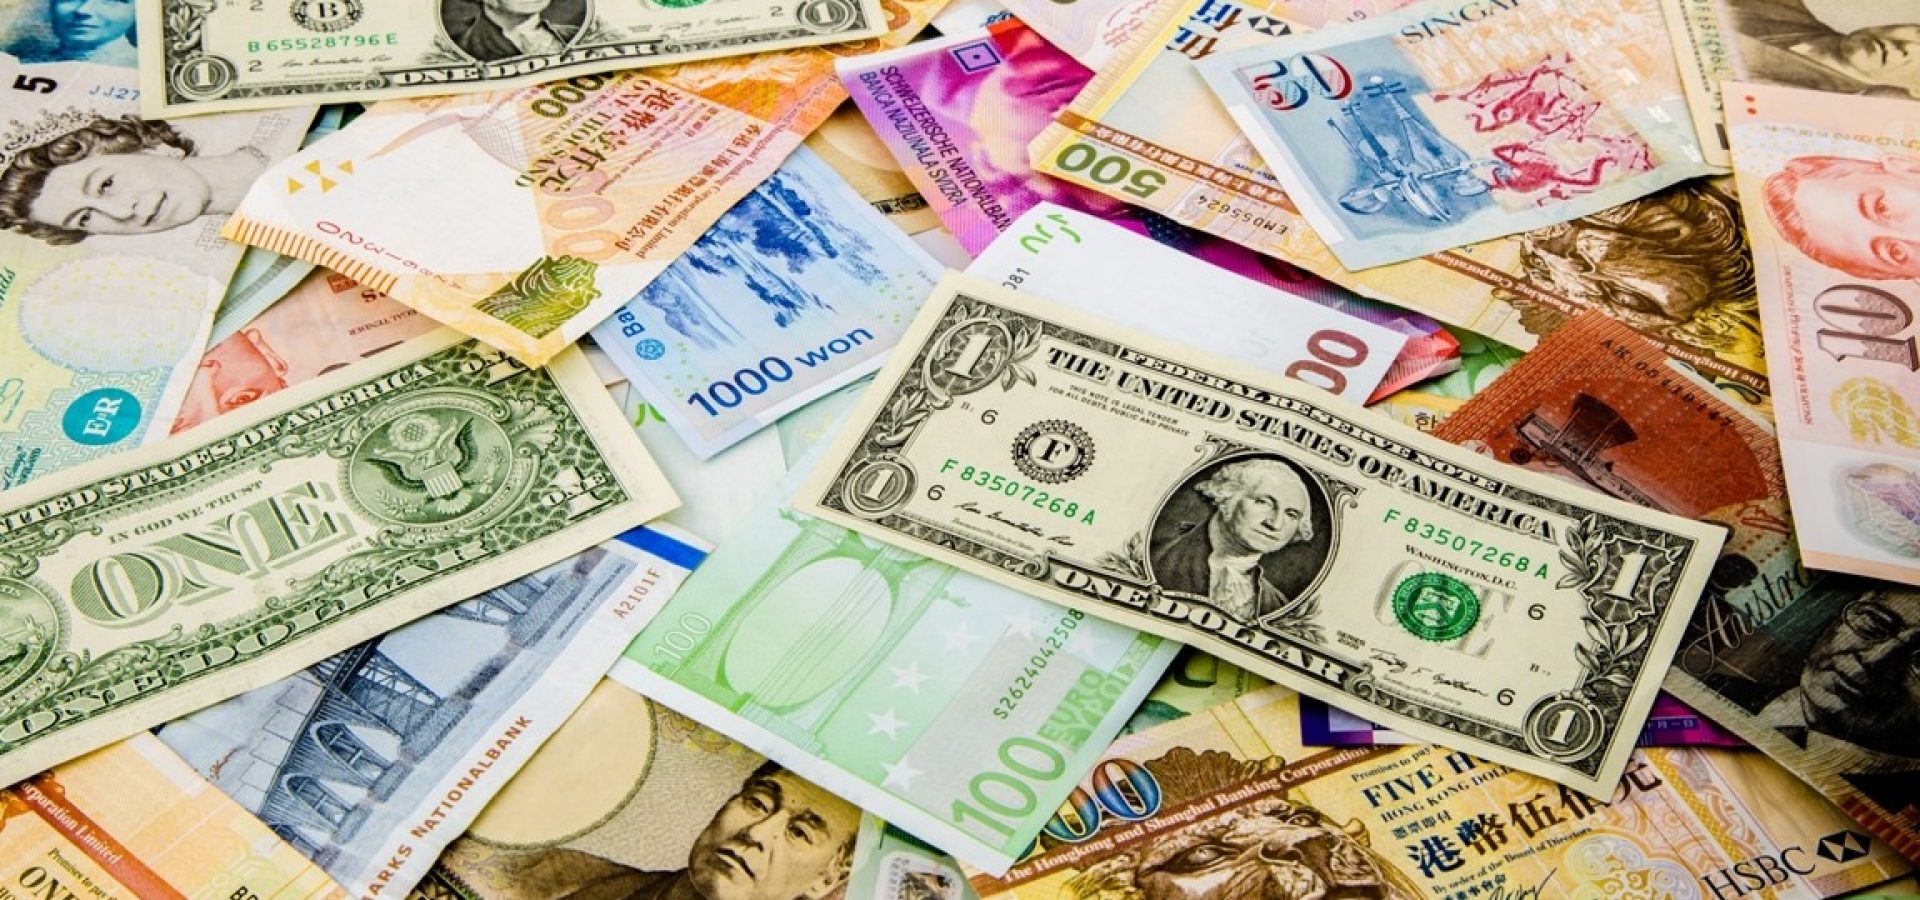 U.S. dollar fluctuated while Yen and Swiss Franc gained